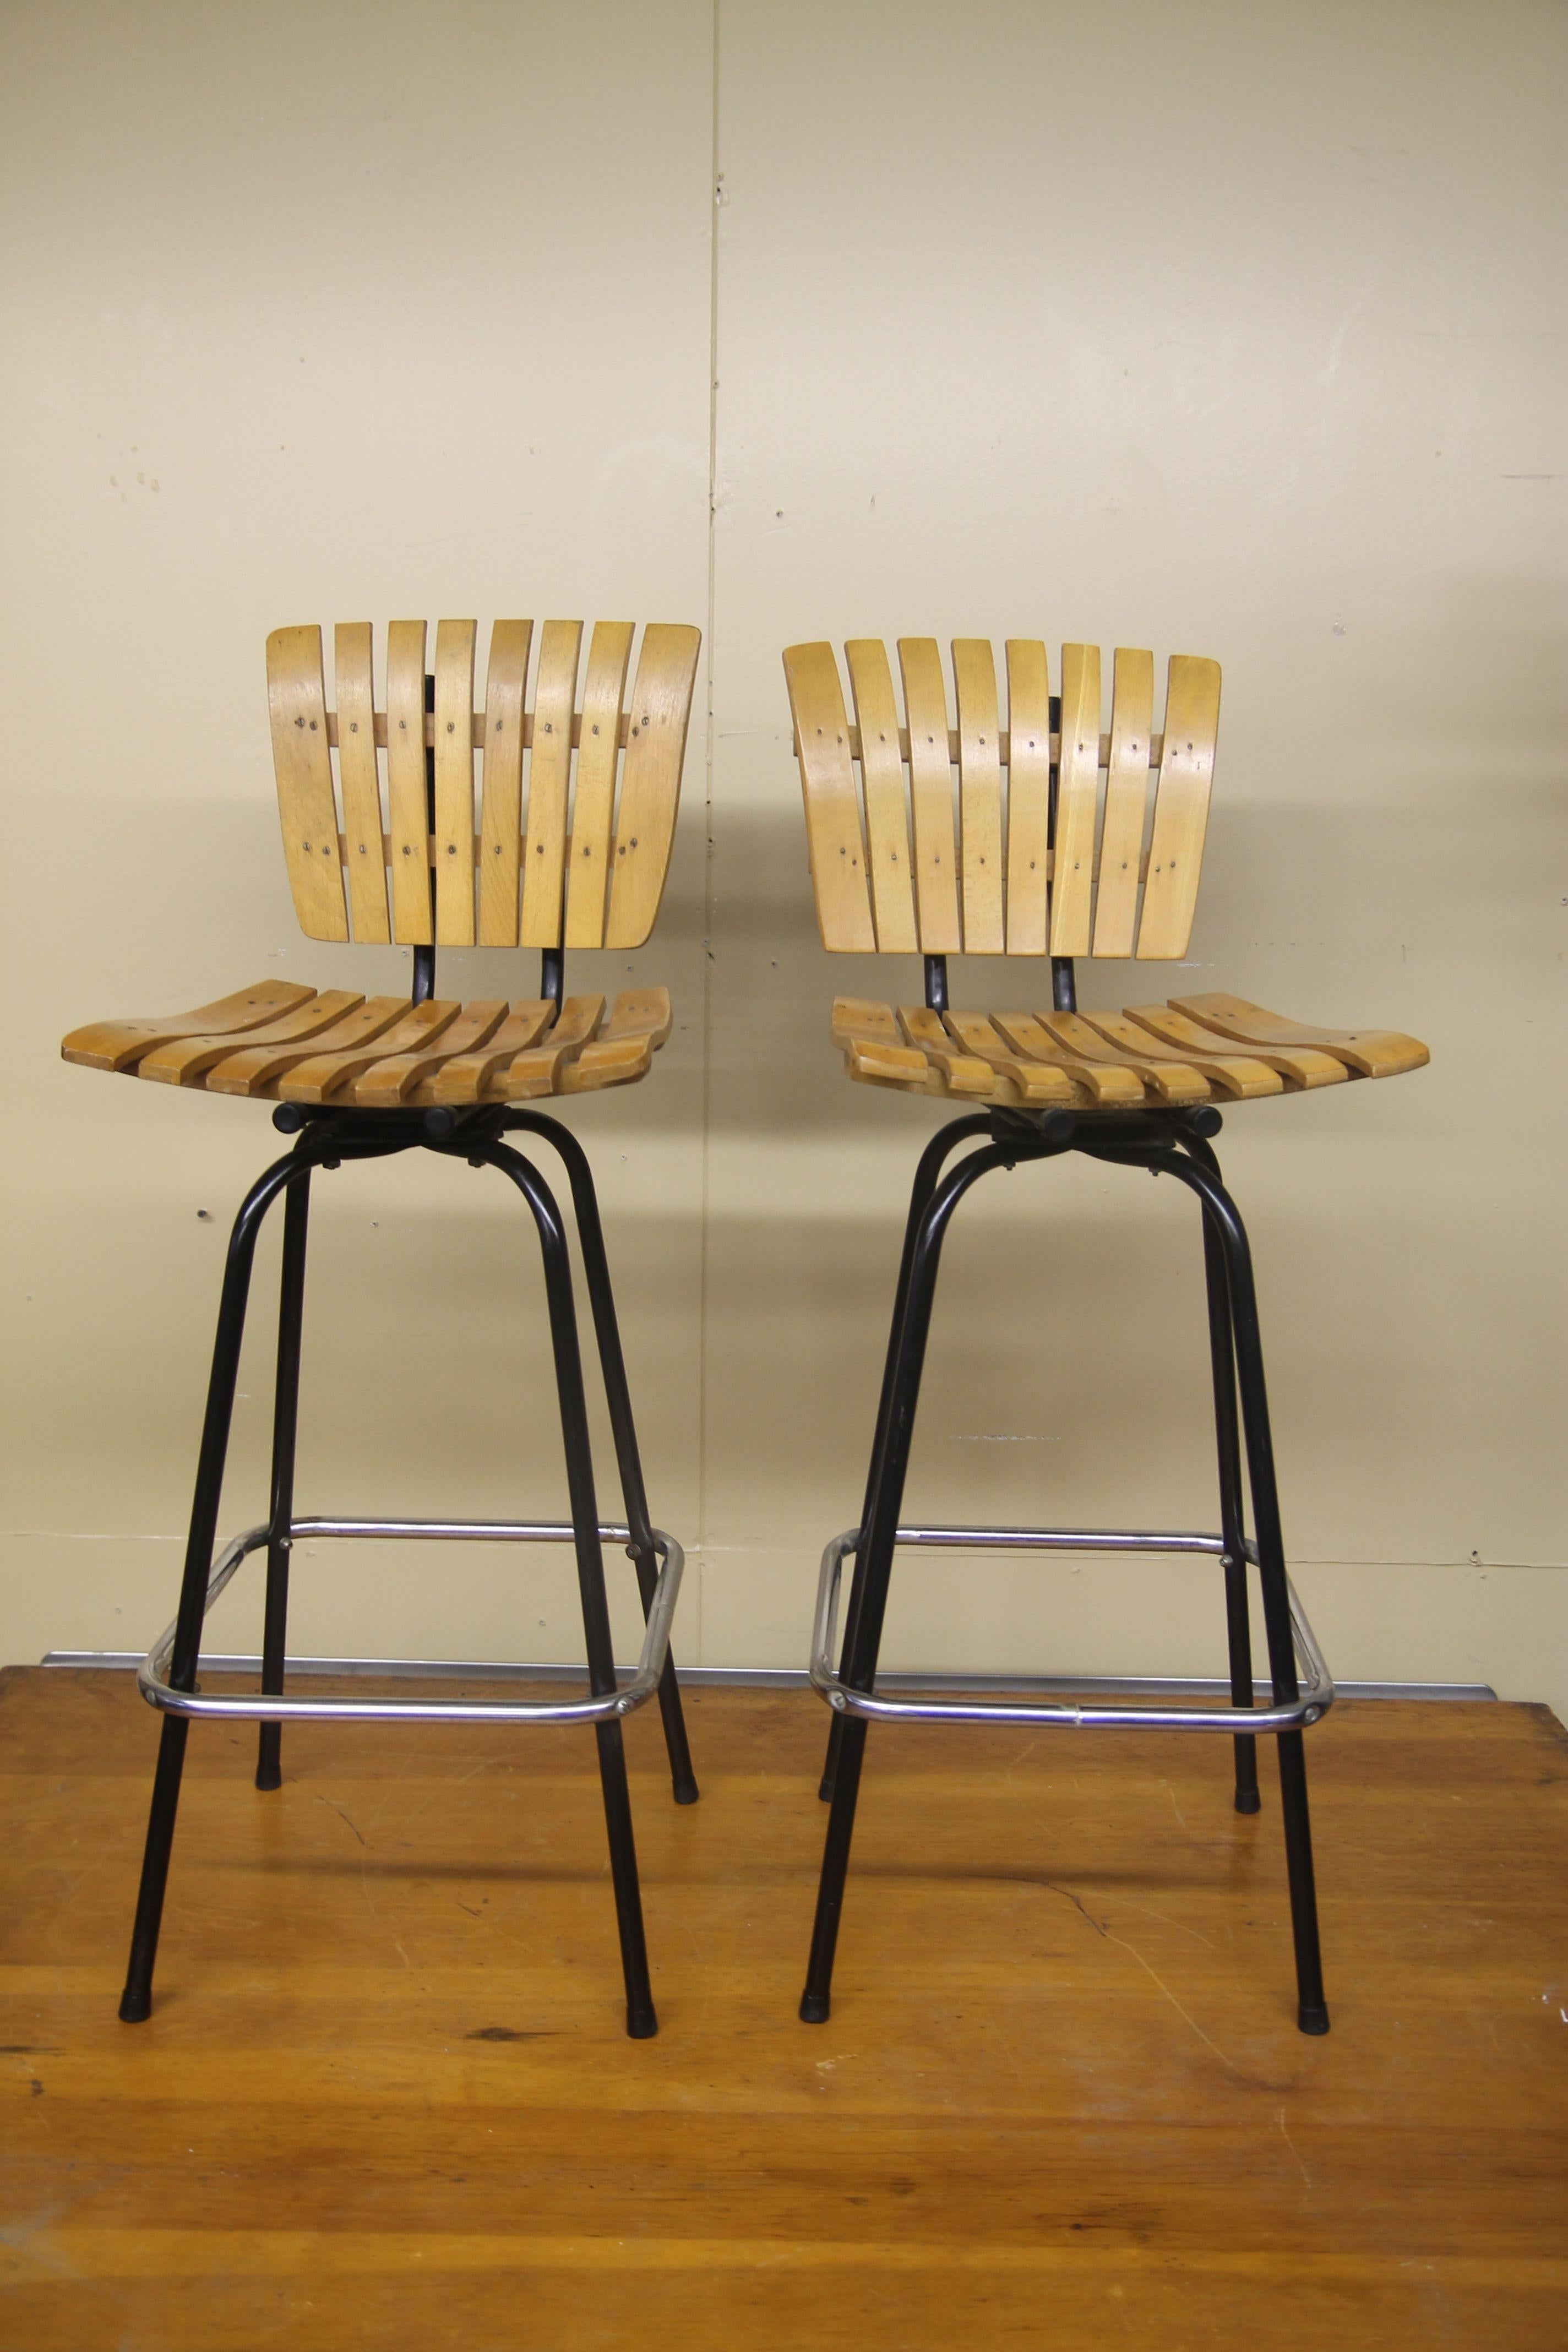 Vintage metal and wood stools in the manner of Arthur Umanoff. These swivel stools are in nice vintage conditon.